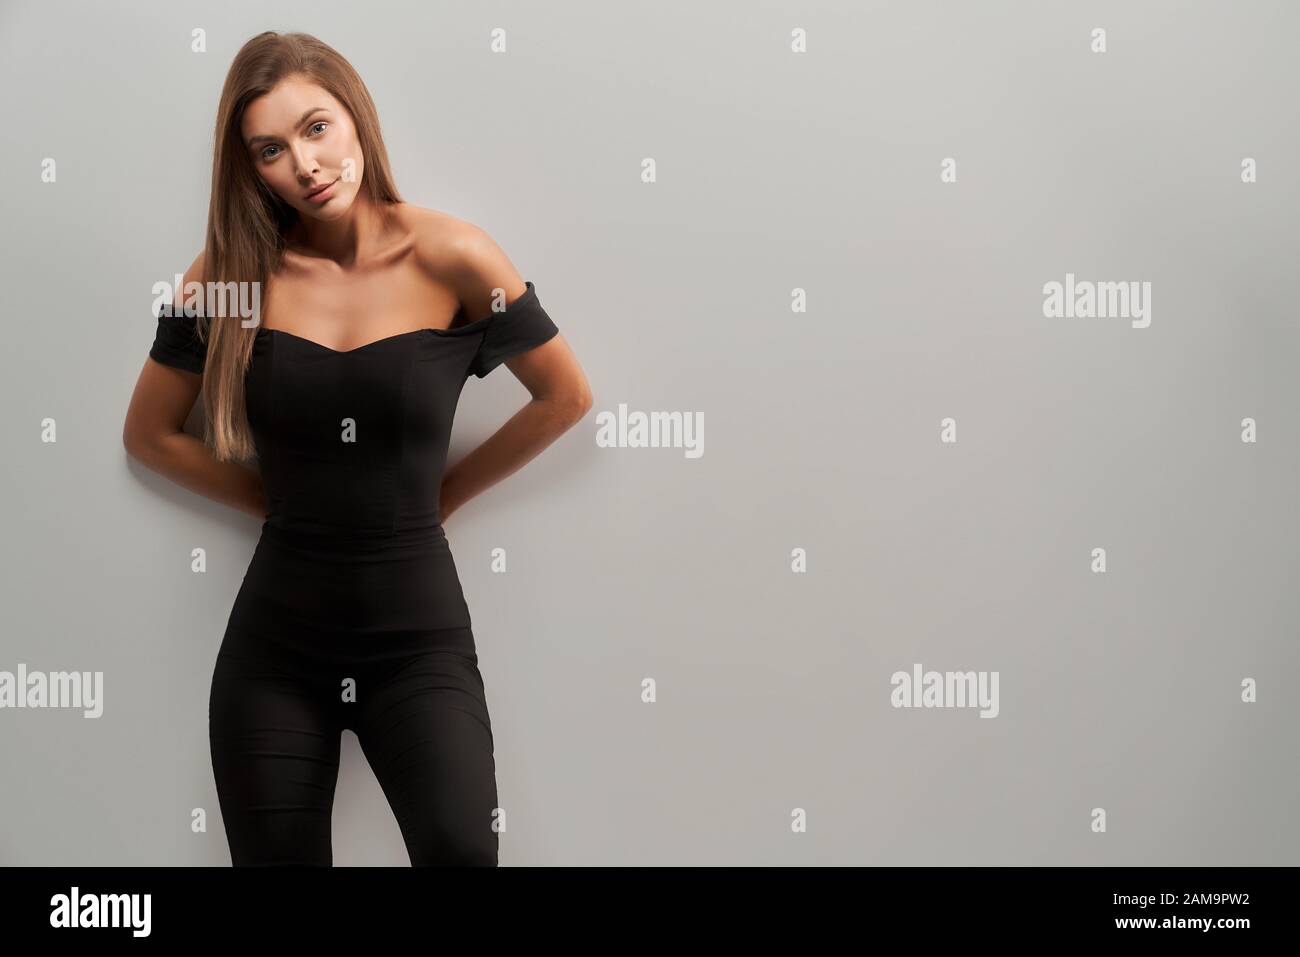 Front view of young attractive brunette girl with long hair posing tilting head and keeping hands behind back in black off shoulder top, trousers on isolated grey background at studio. Stock Photo